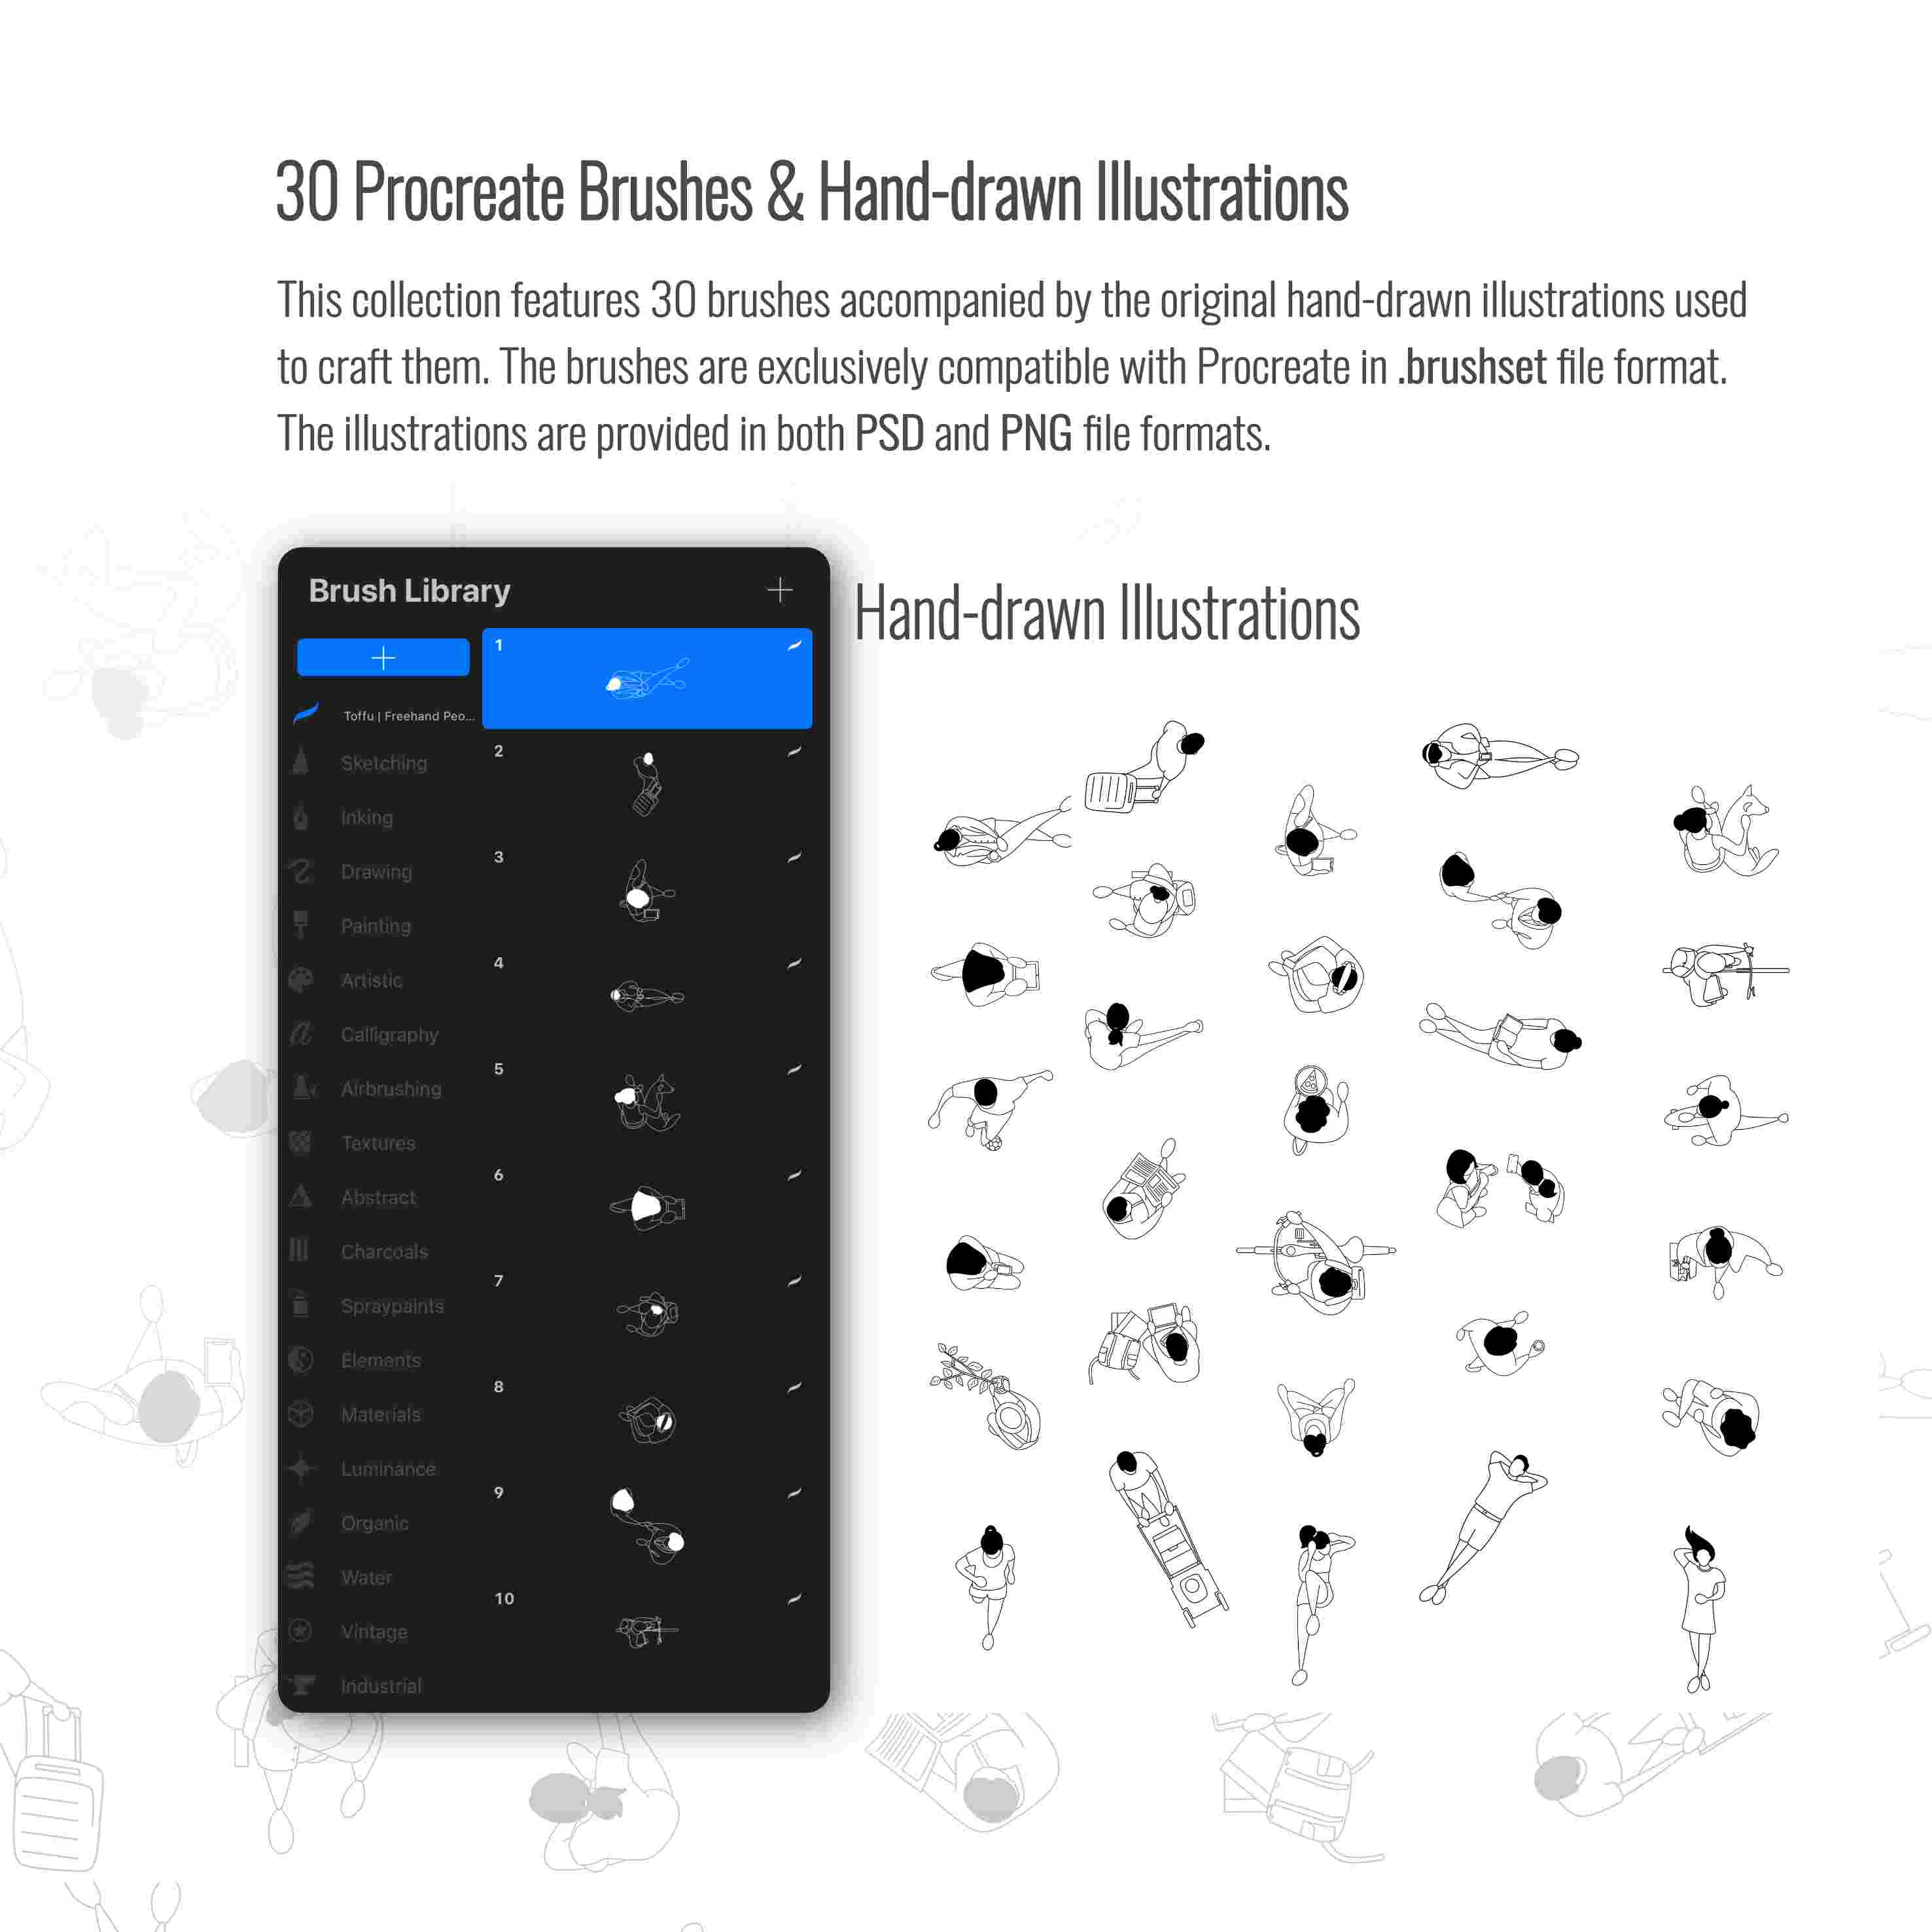 Procreate Freehand People Plan View Brushset & Illustrations PNG - Toffu Co